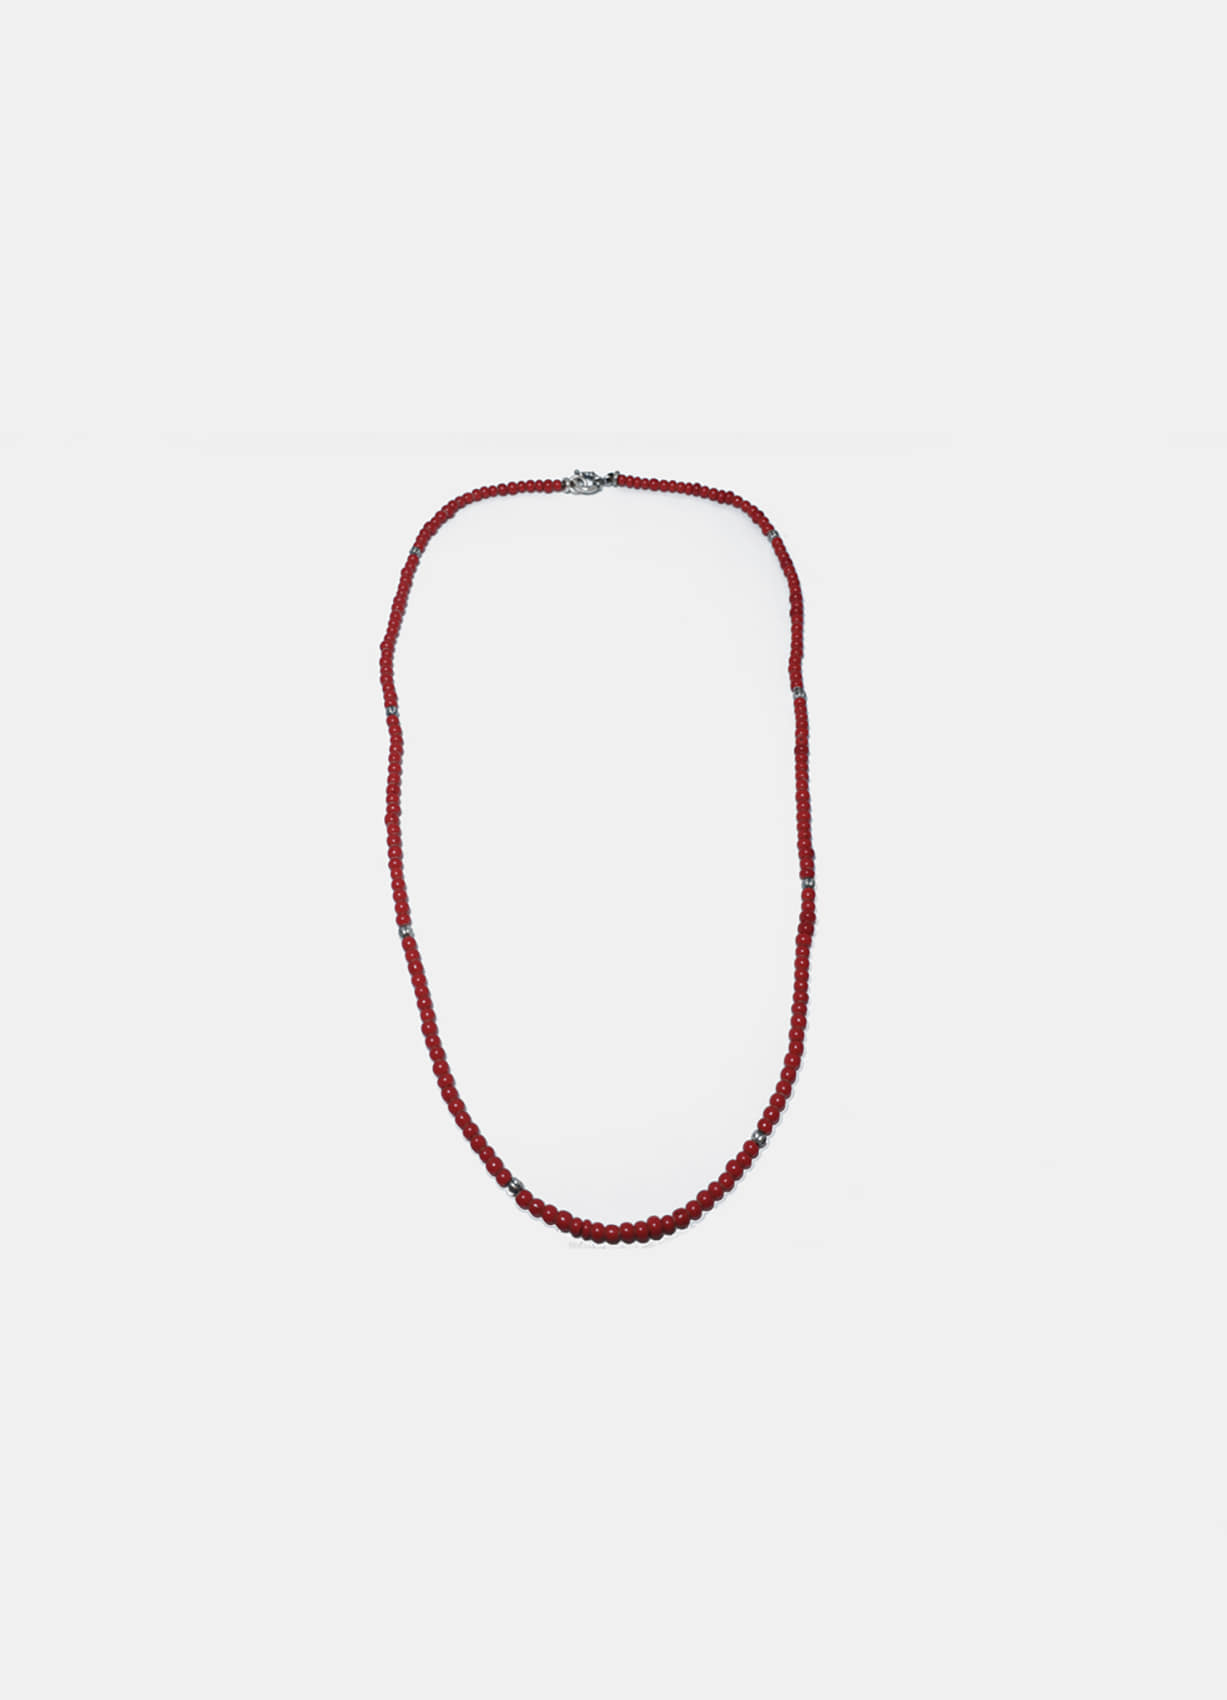 [fluid] red beads necklace